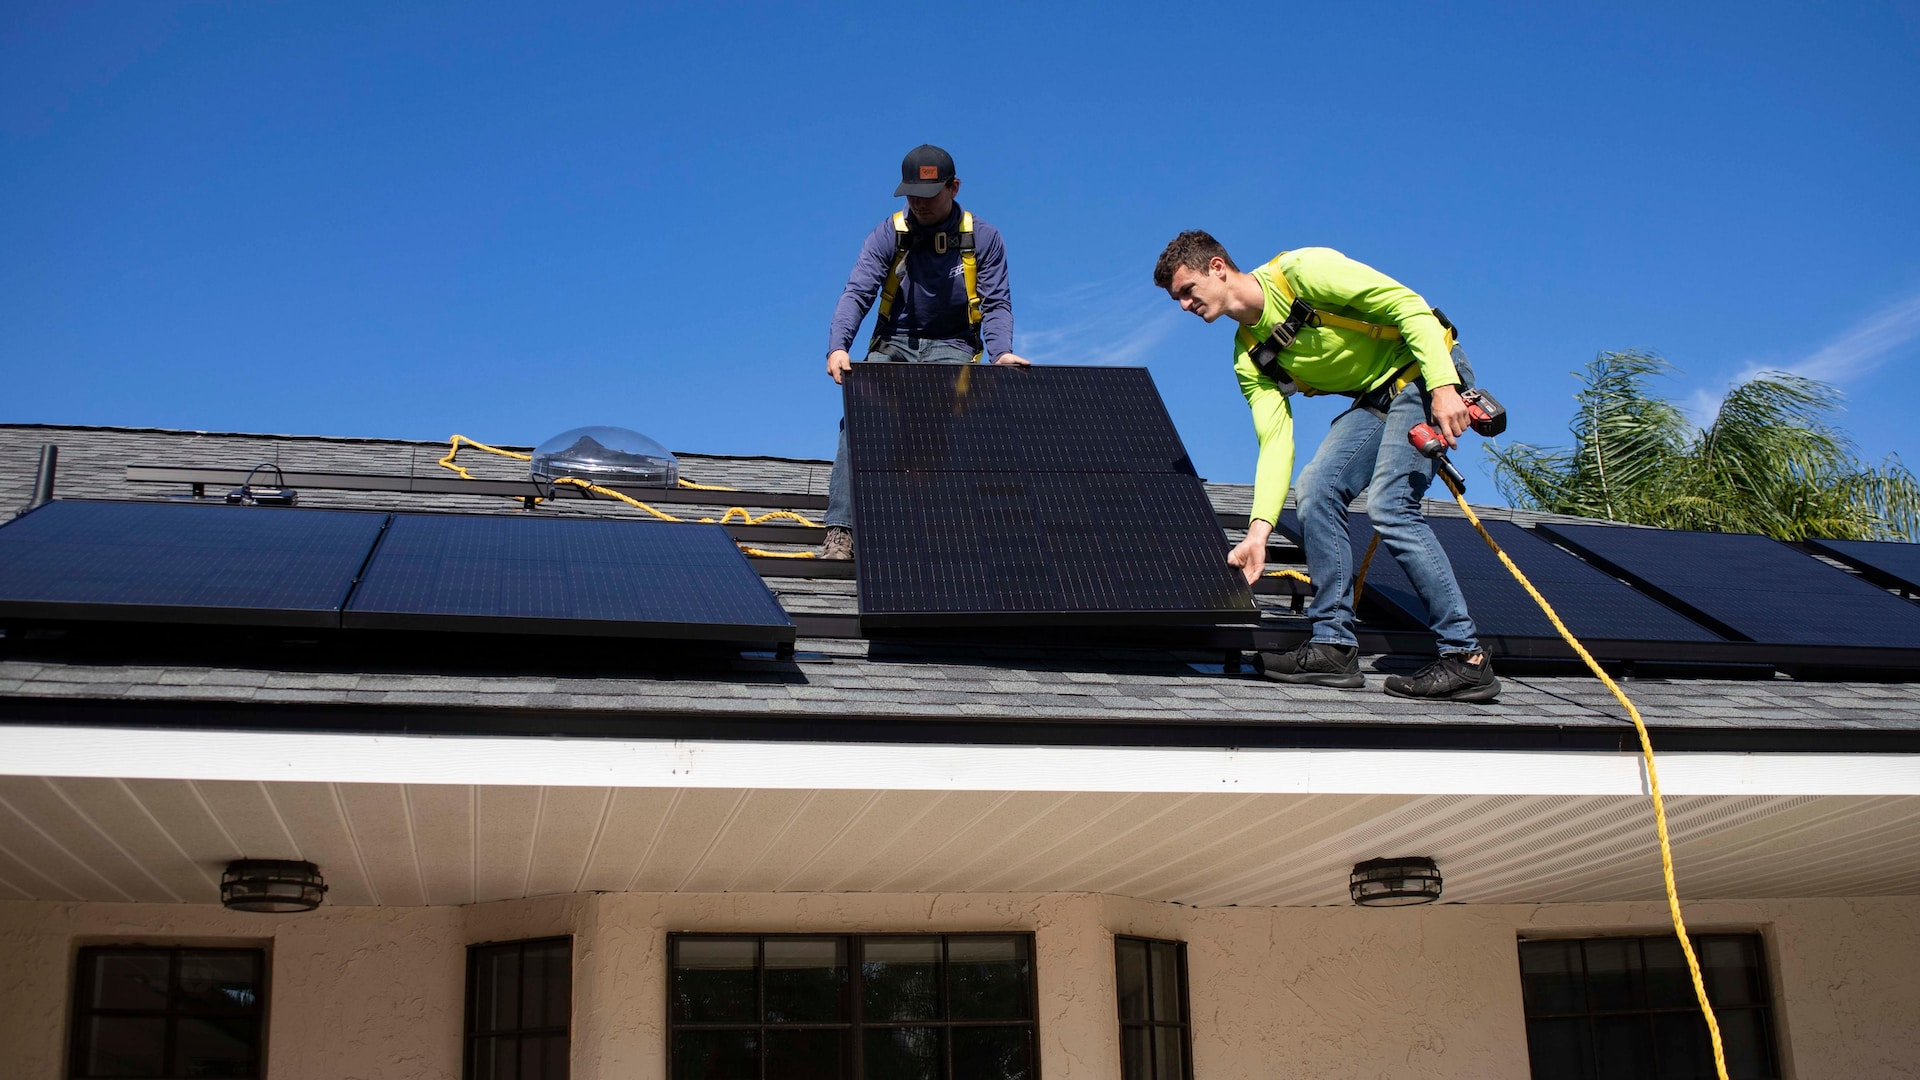 Professional electricians installing solar panels on a roof, as part of a solar EV charging station. 